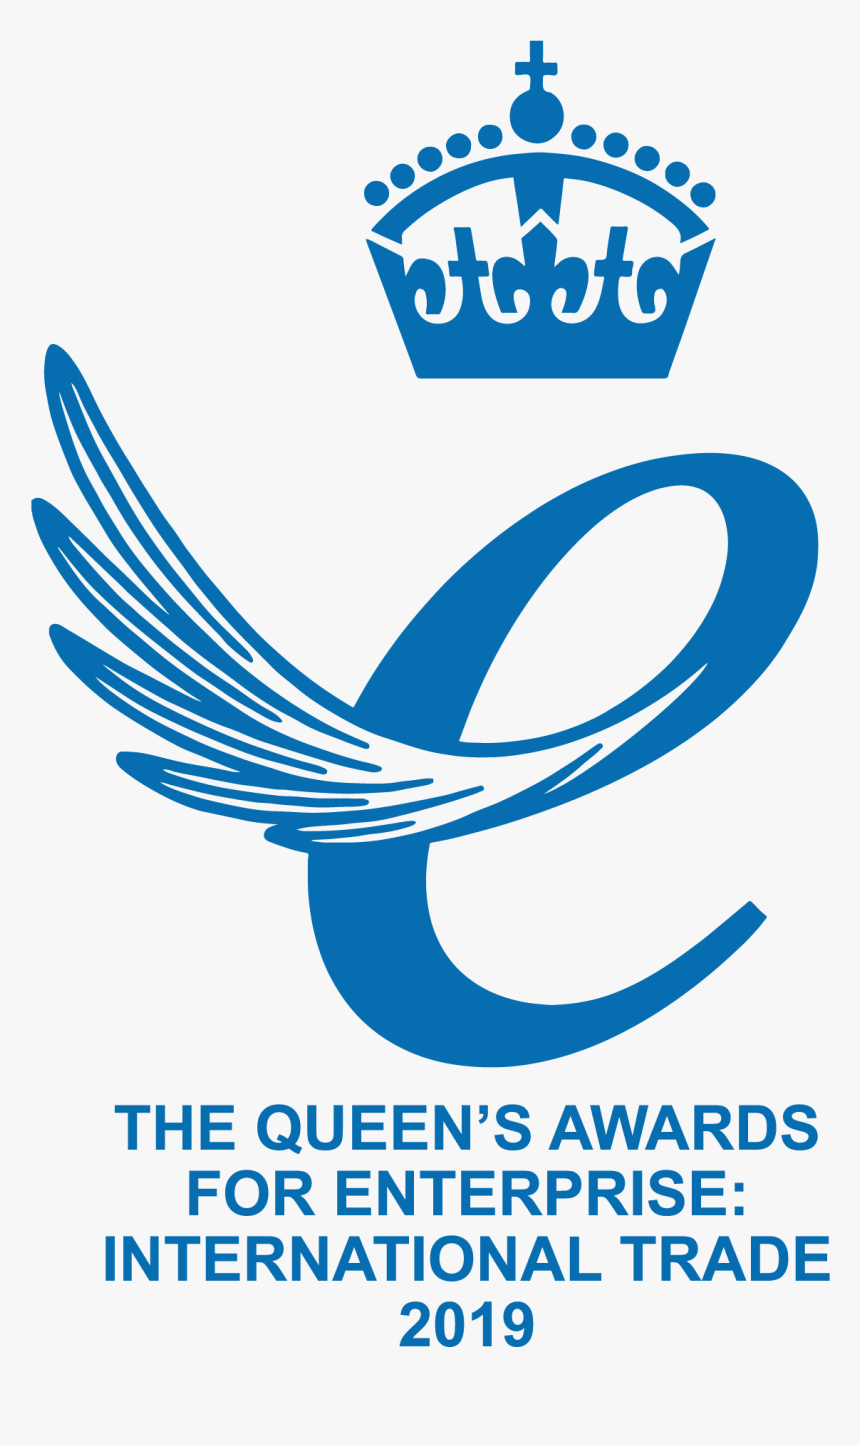 Qa It 0 - Queen's Award For Enterprise International Trade 2019, HD Png Download, Free Download